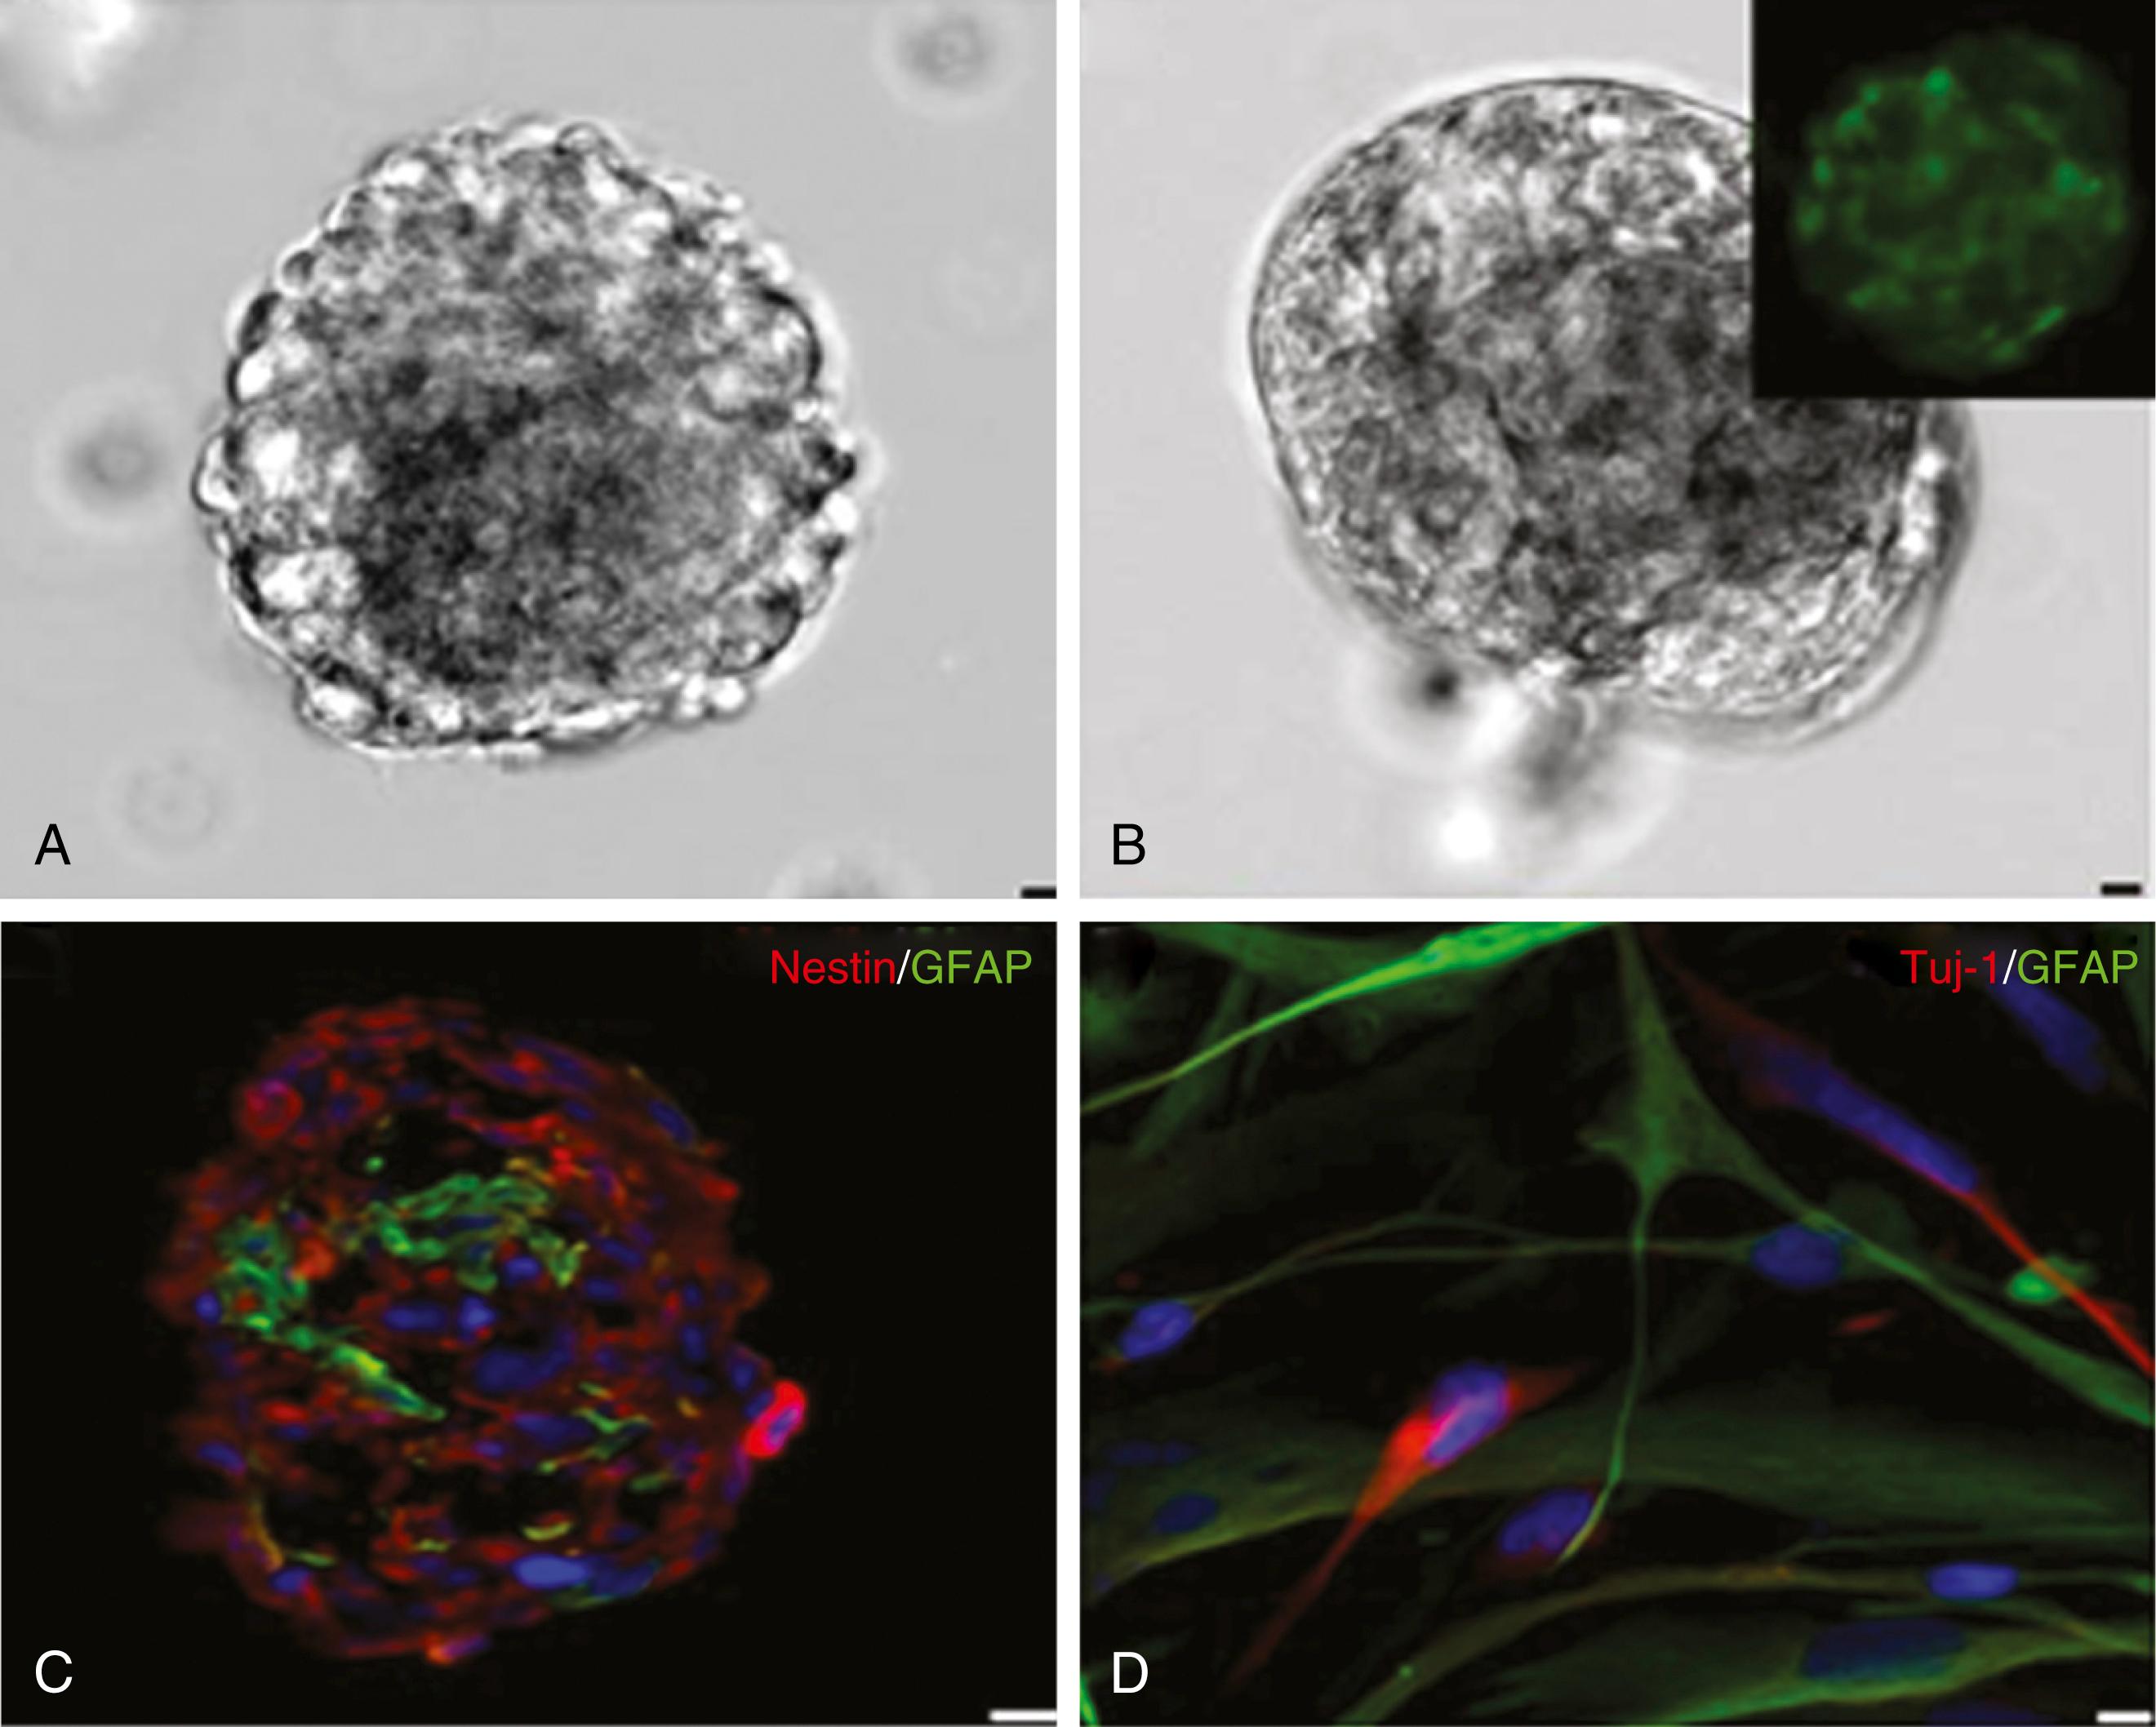 Figure 135.1, Light microscopy (A–B) and immunocytochemistry (C–D) photomicrographs of neurospheres derived from human purified astrocytes. Samples originated from glioblastoma multiforme (A) and the subventricular zone (B). (C) These neurospheres display the immature cell marker nestin (red) in the periphery and the astrocytic marker glial fibrillary acidic protein (GFAP) in the core (green). (D) After differentiation, neurospheres give rise to cells that express neuron (red) or astrocyte (green) markers (Tuj-1 and GFAP, respectively).